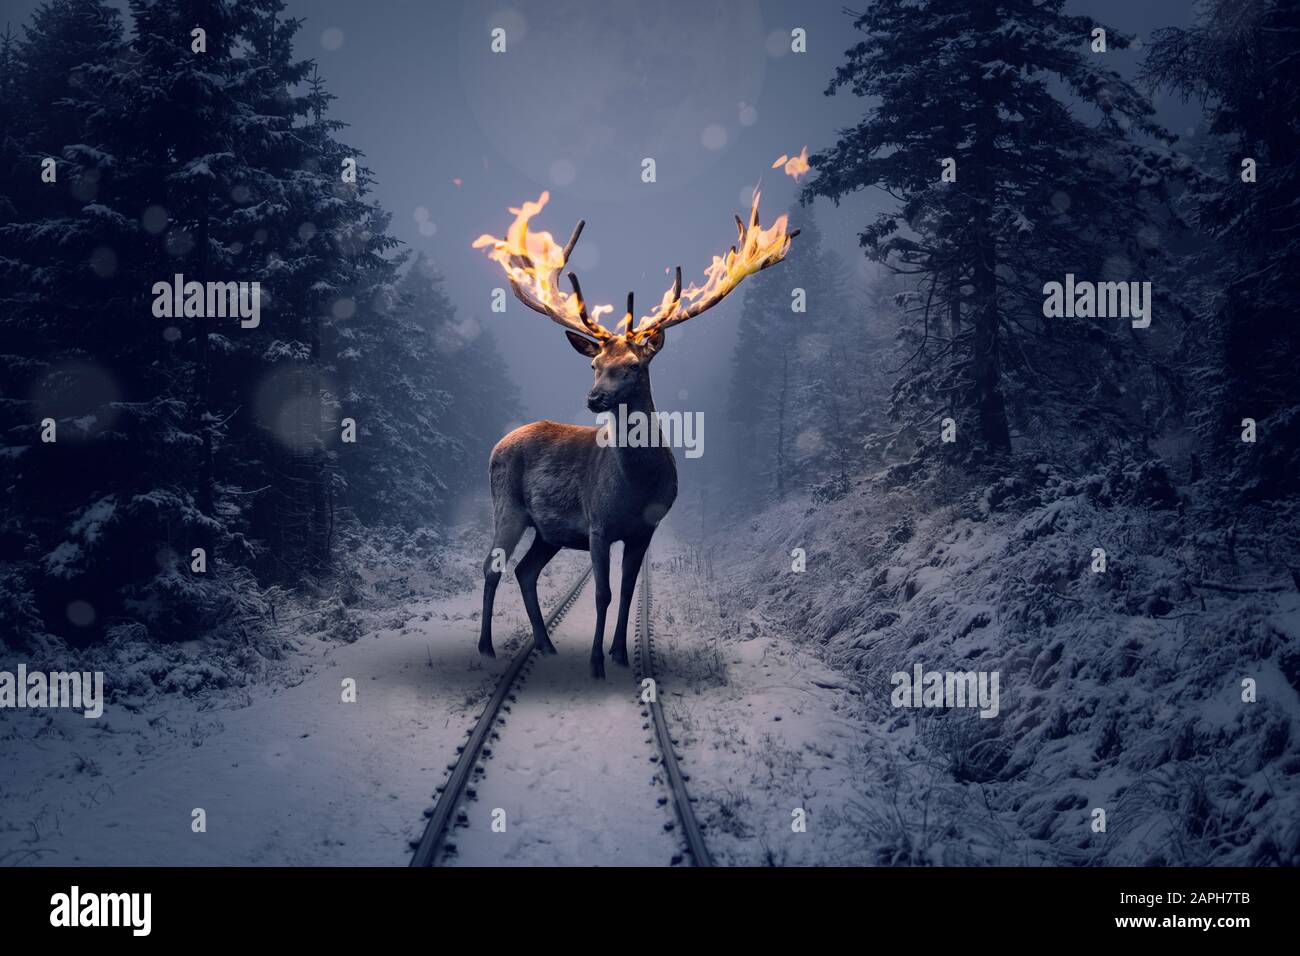 A deer with burning antlers stands in the winter forest Stock Photo